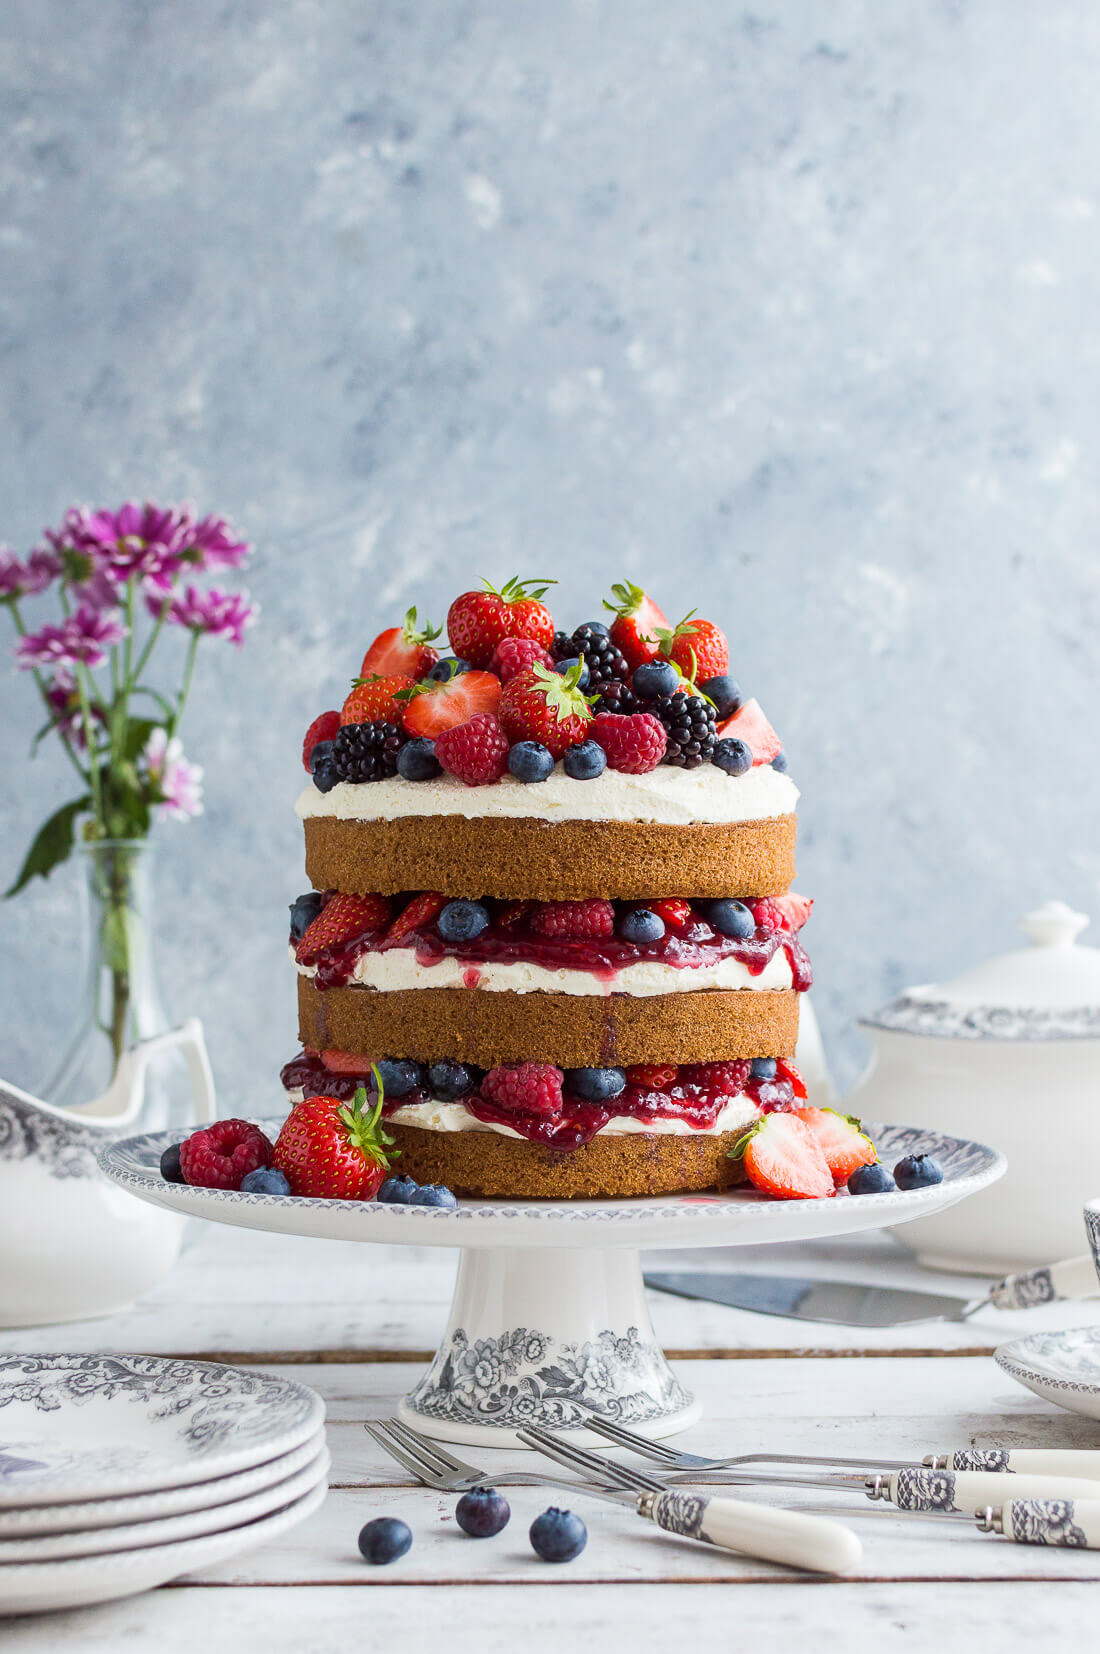 Tempted by this beautiful cake? Start your own Veganuary with this simple vanilla sponge